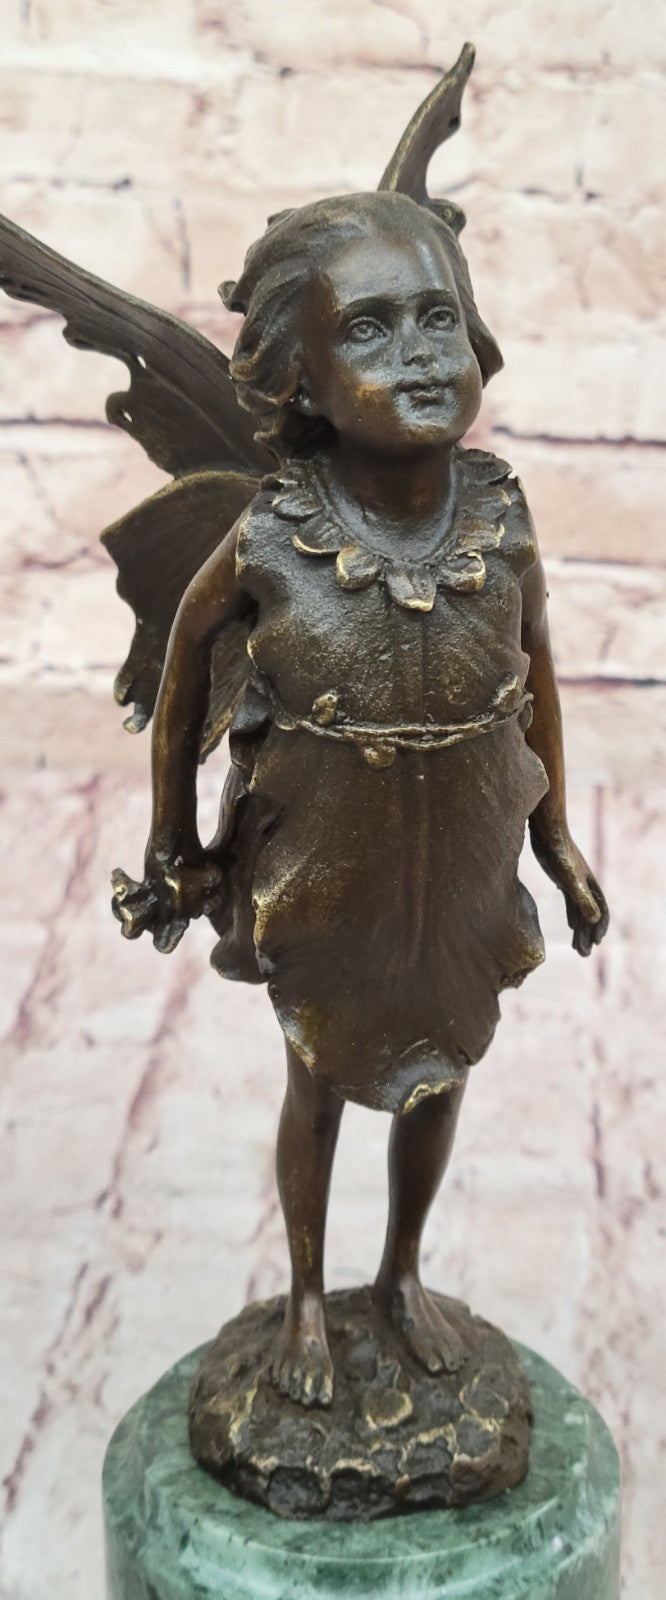 Milo's Hot Cast Bronze Fairy Baby Angel Sculpture: Handcrafted Figurine for Home Decor